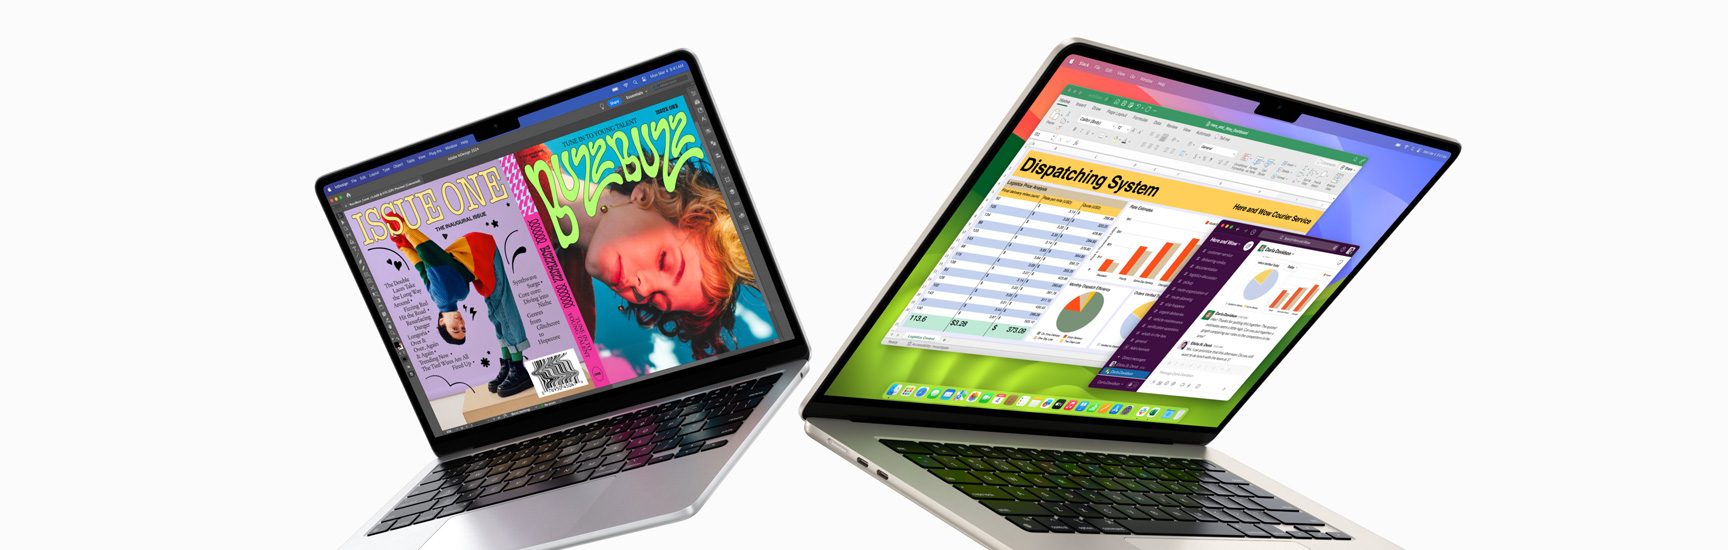 Partially open 13″ MacBook Air on left and 15″ MacBook Air on right. 13″ screen shows colourful ‘zine cover created with In Design. 15″ screen shows Microsoft Excel and Slack.